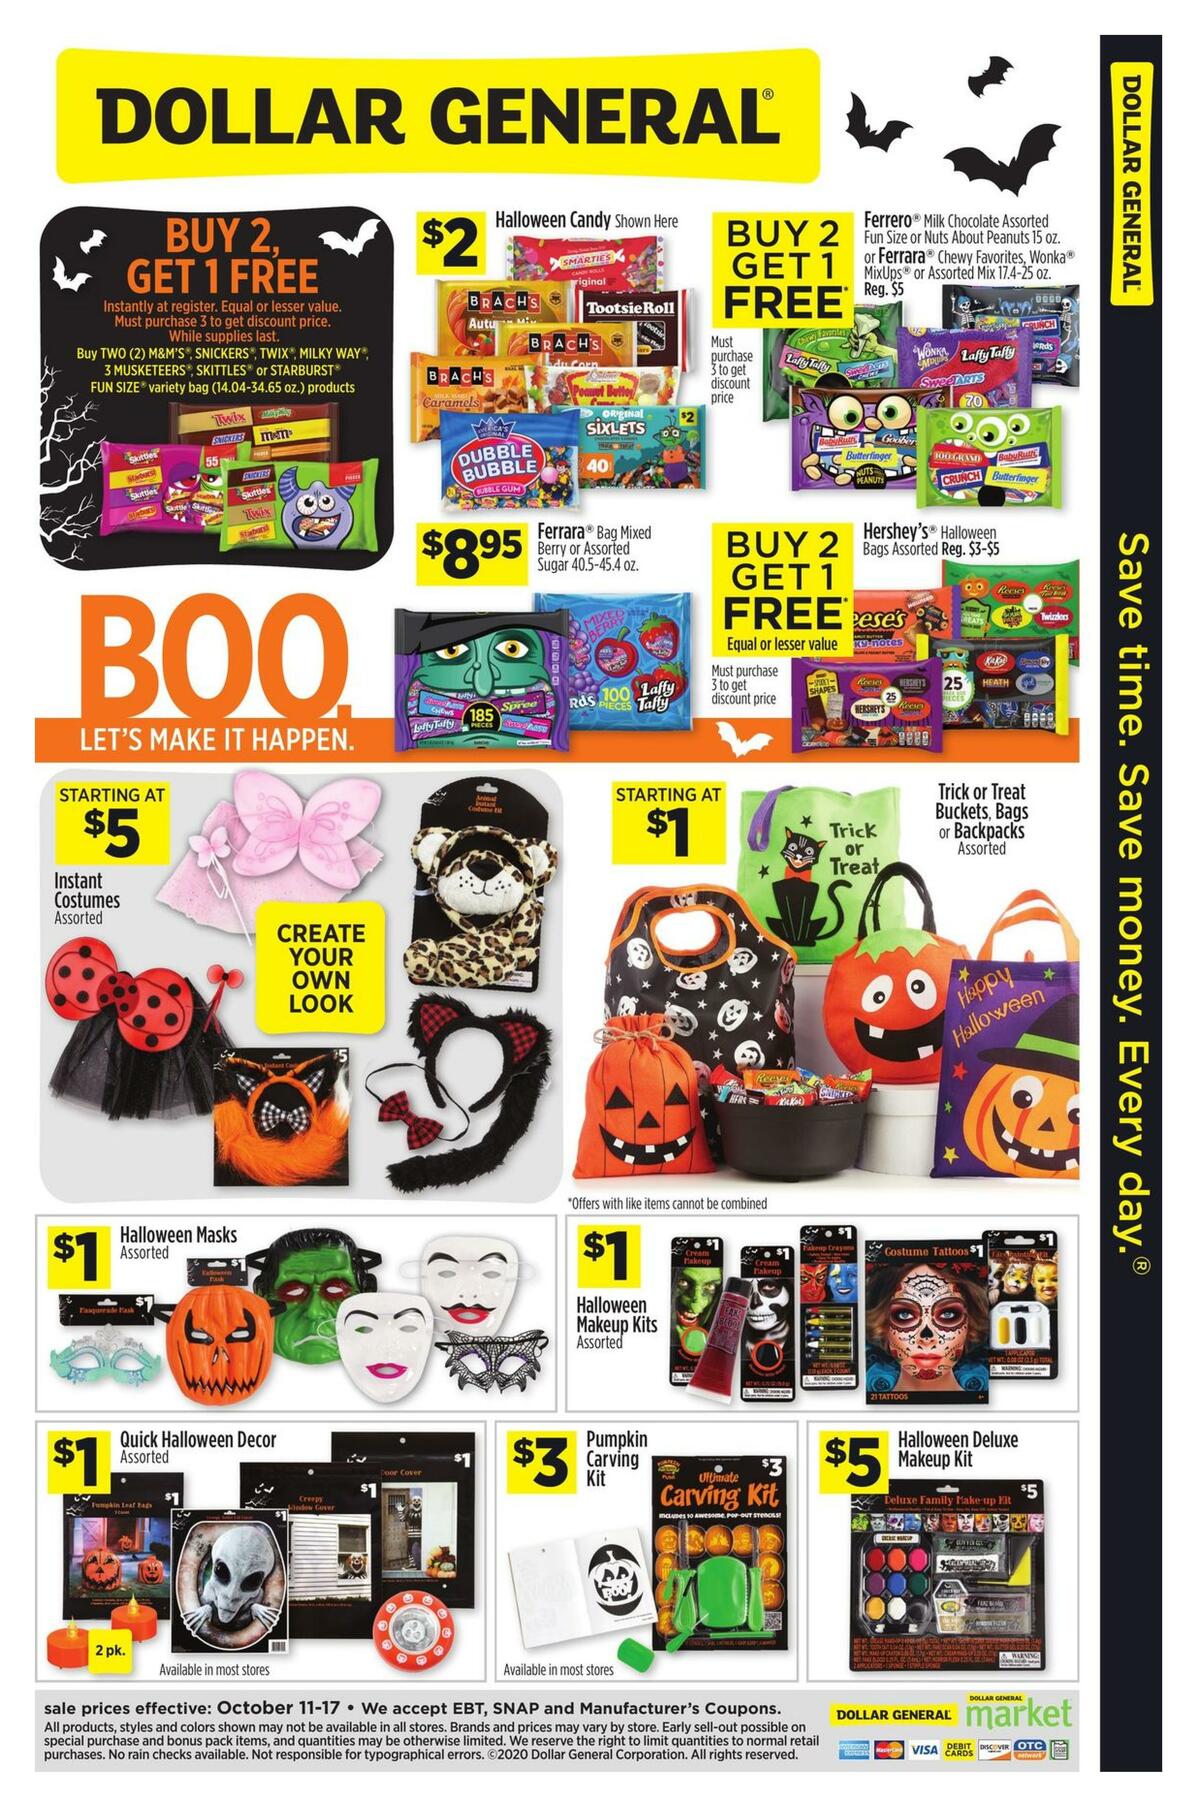 Dollar General Boo. Let's Make It Happen. Weekly Ad from October 11